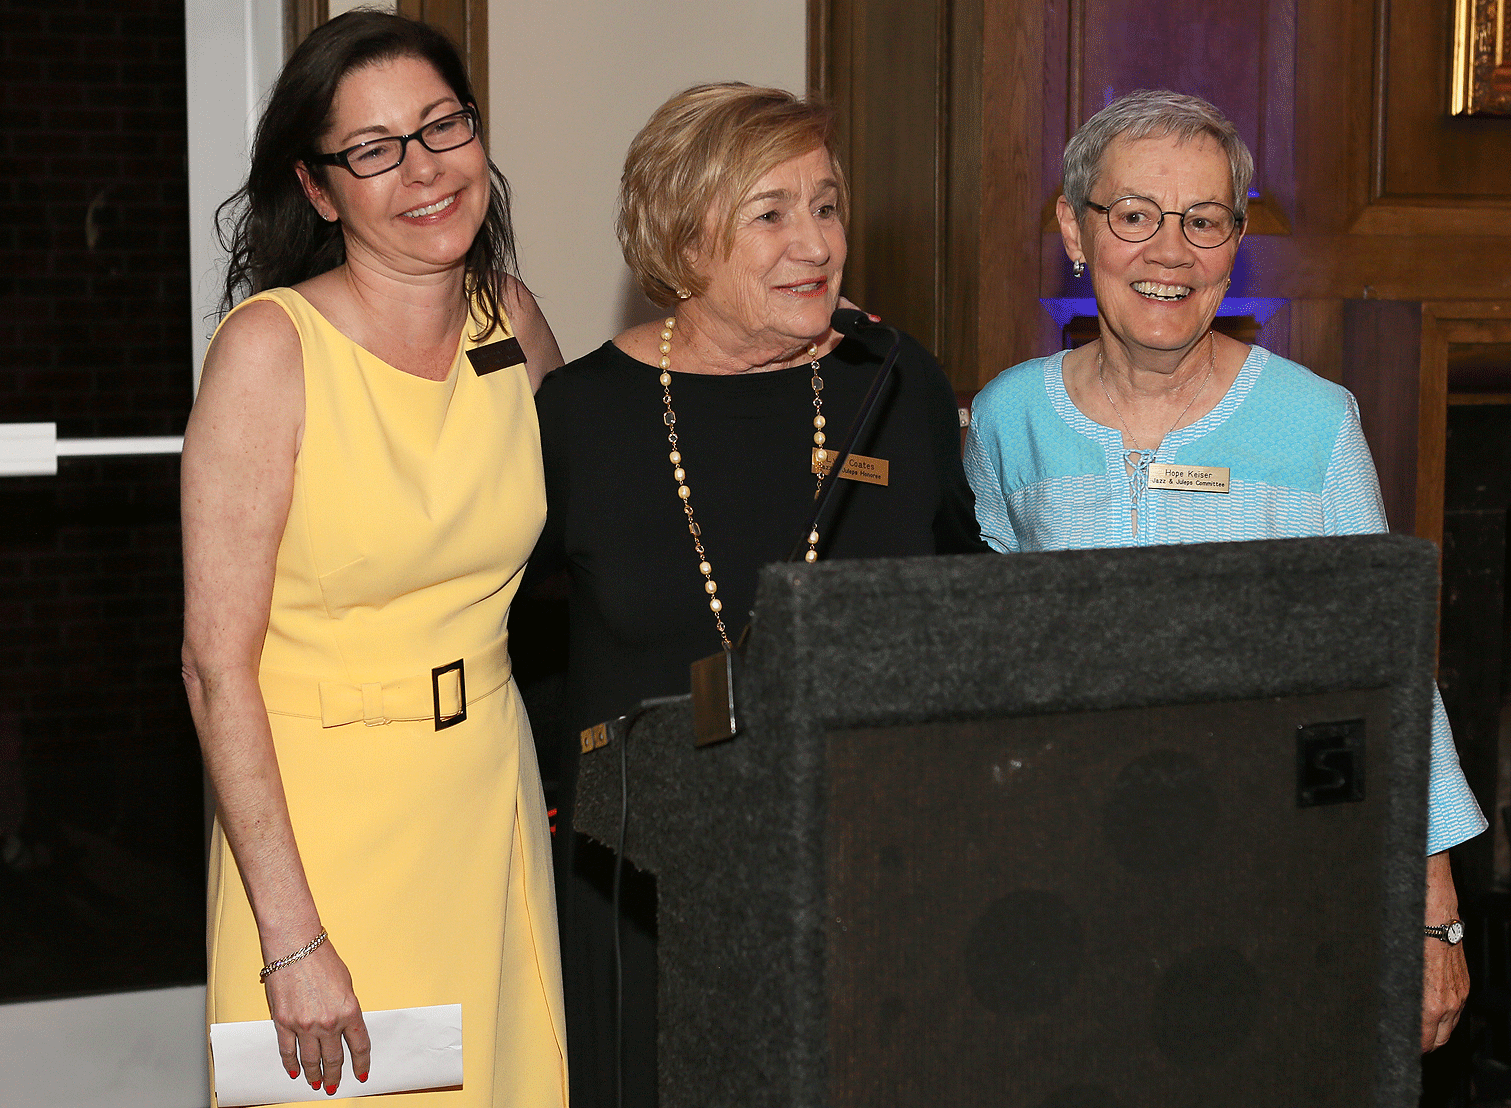 Lynn Coates (middle) and her daughter, Caroline Coates-Nelson (left) were honored at the seventh annual Jazz & Juleps event on May 26.